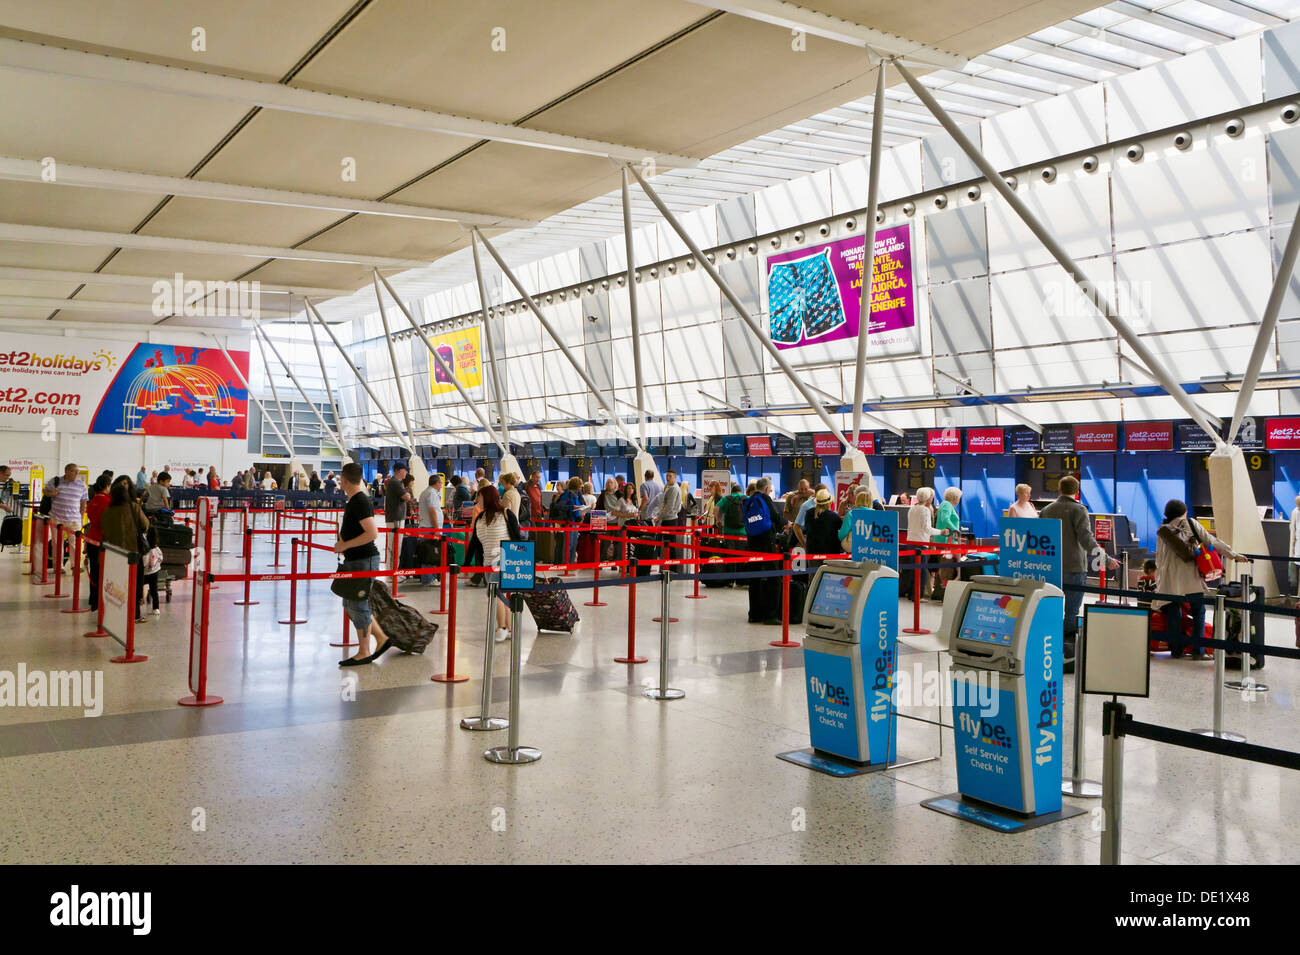 East Midlands airport check in lines to desks area Castle Donnington Derbyshire England UK GB EU Europe Stock Photo